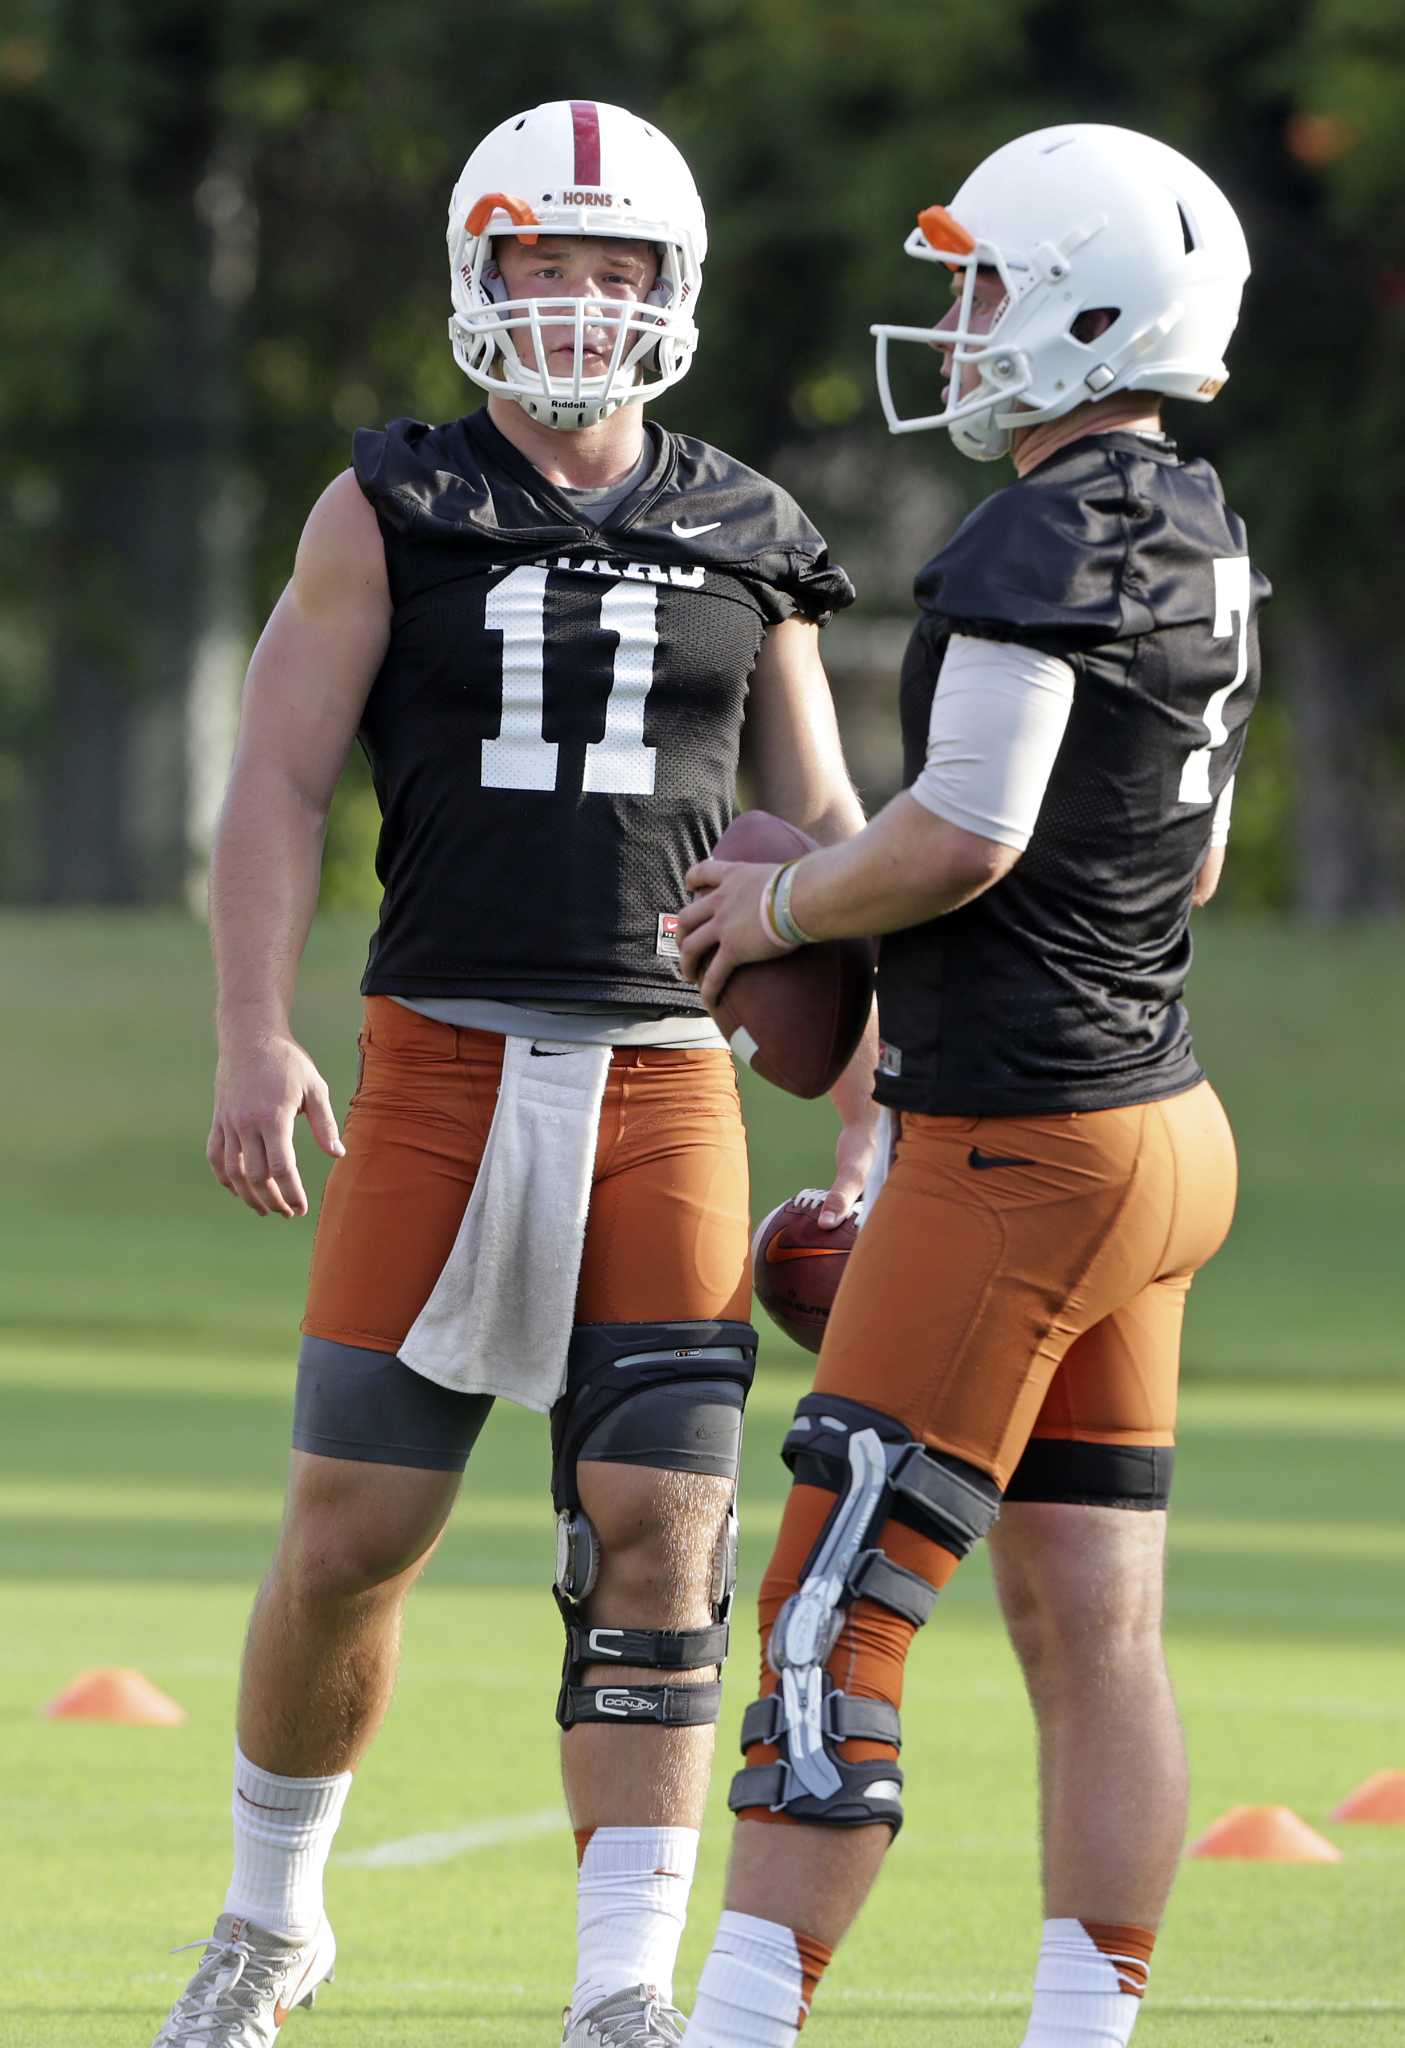 Shane Buechele gets the nod as Texas' QB … for now